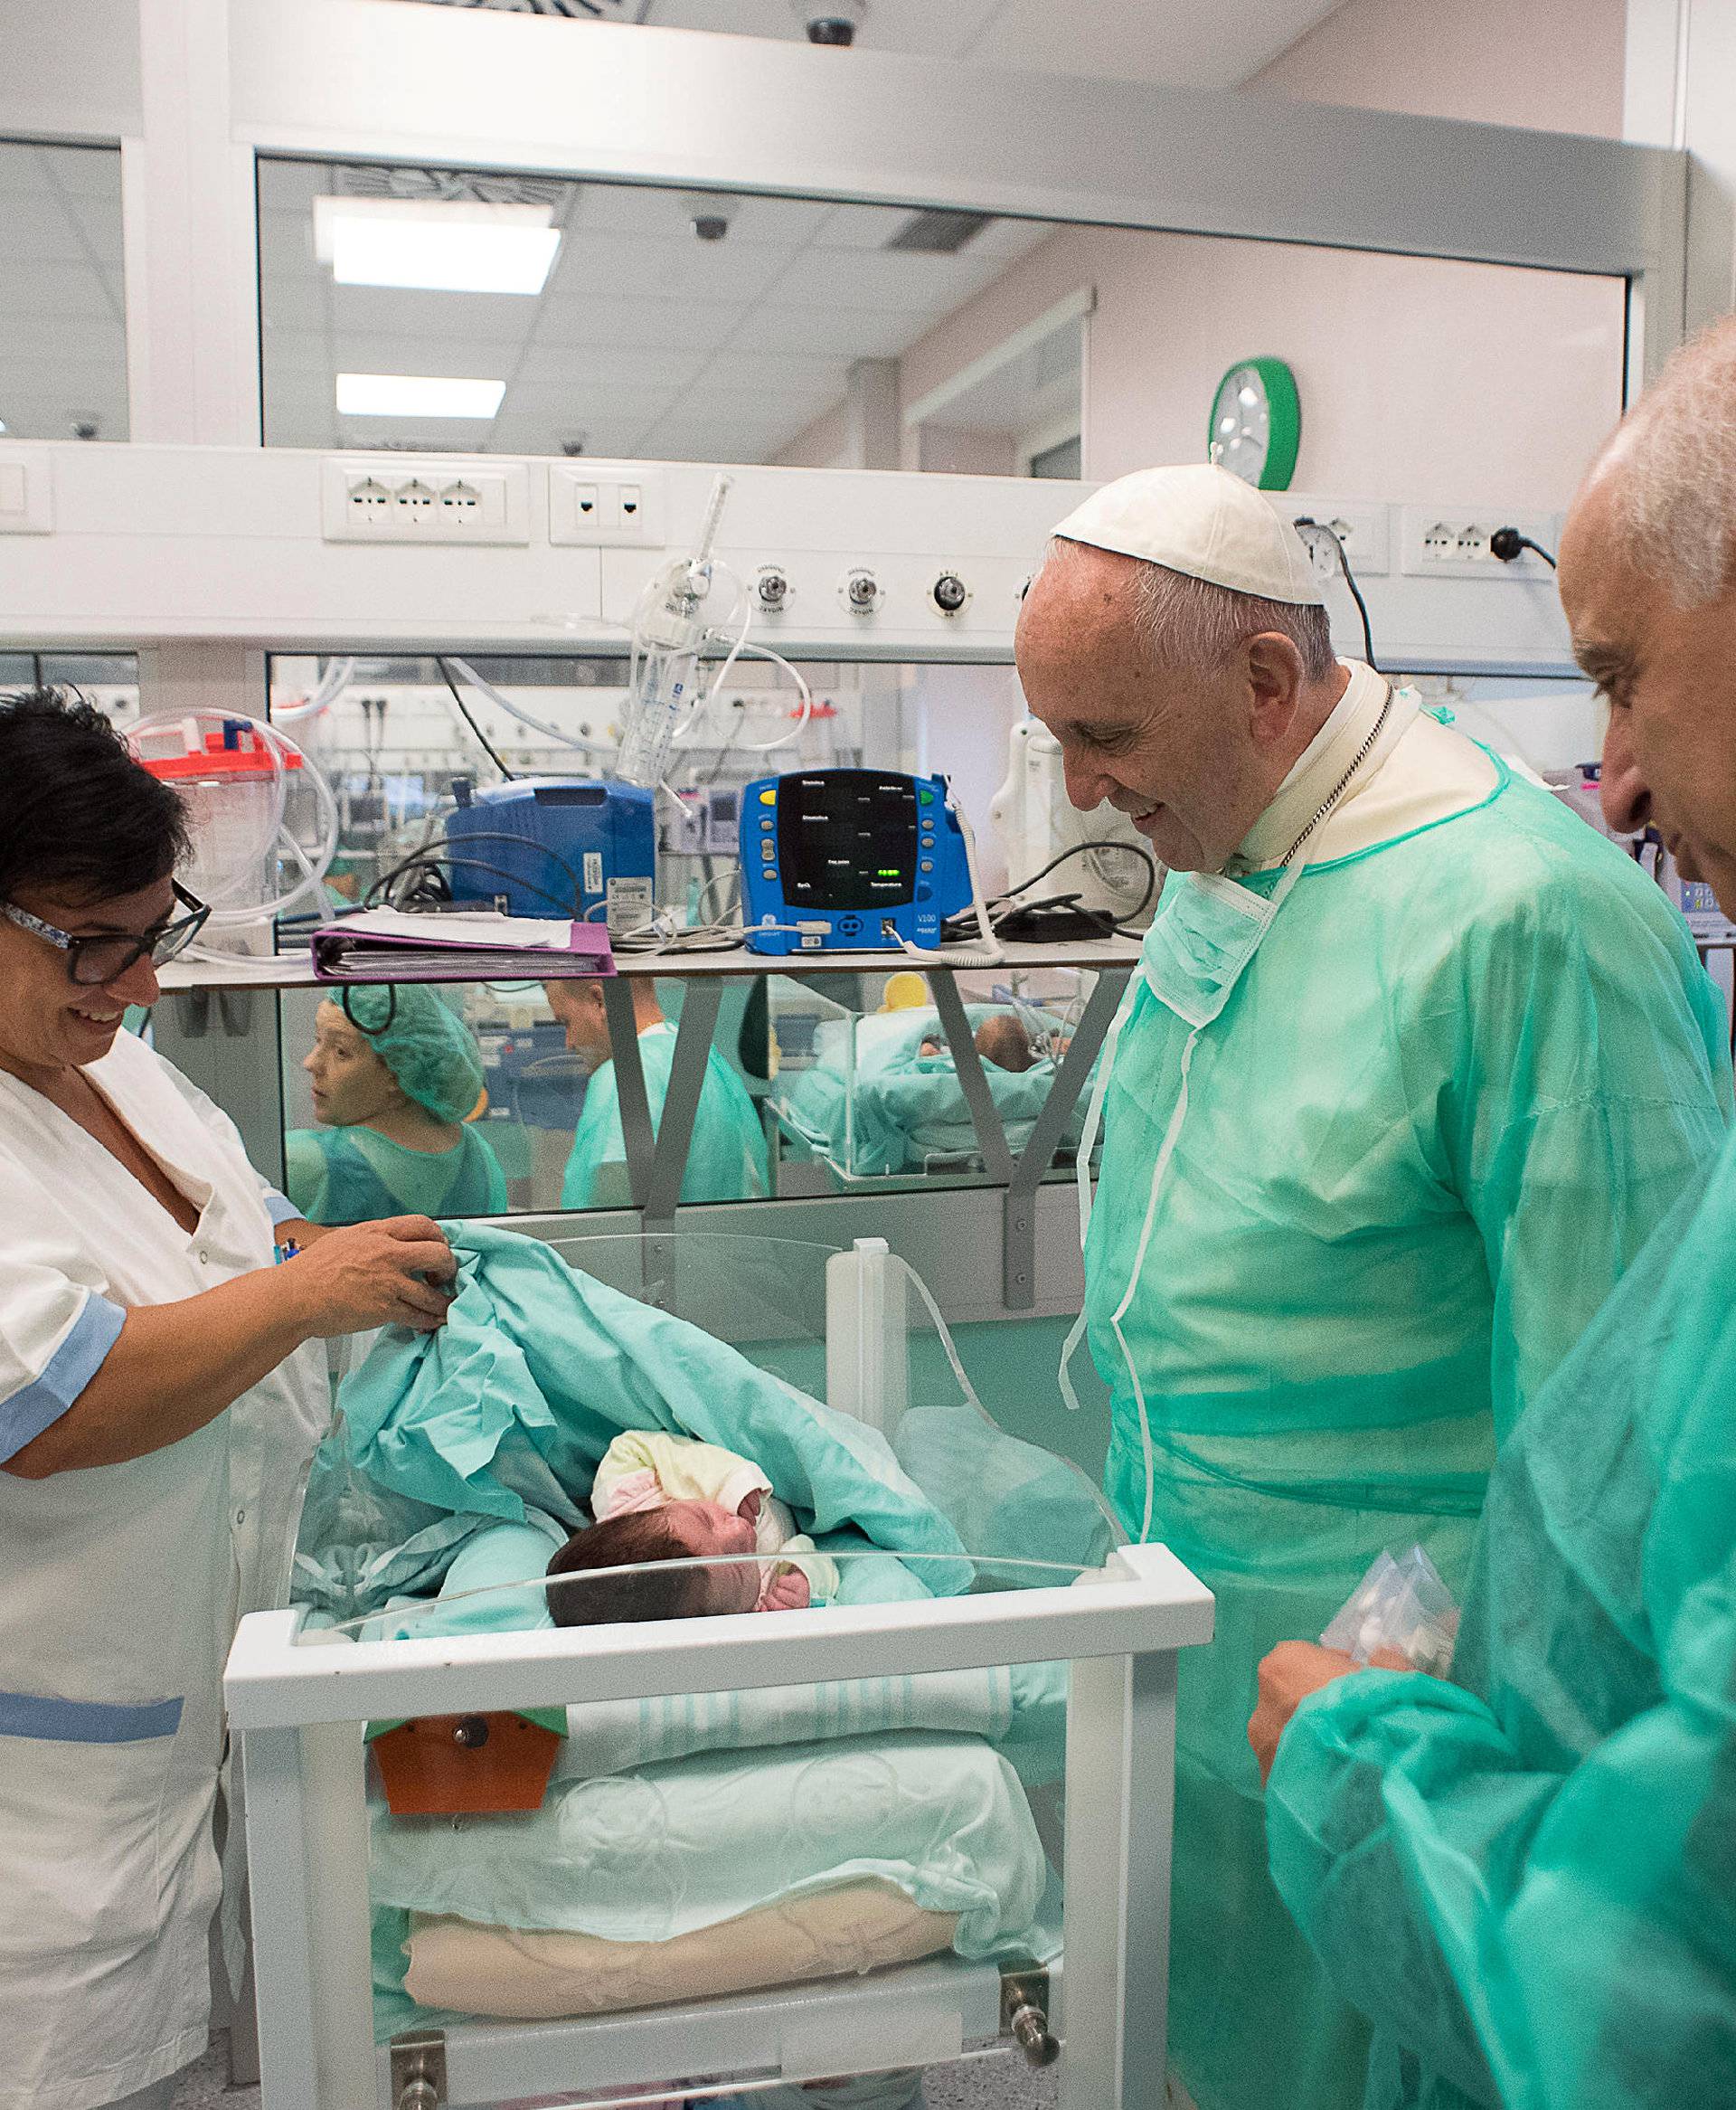 Pope Francis visits the nursery at the San Giovanni hospital in Rome